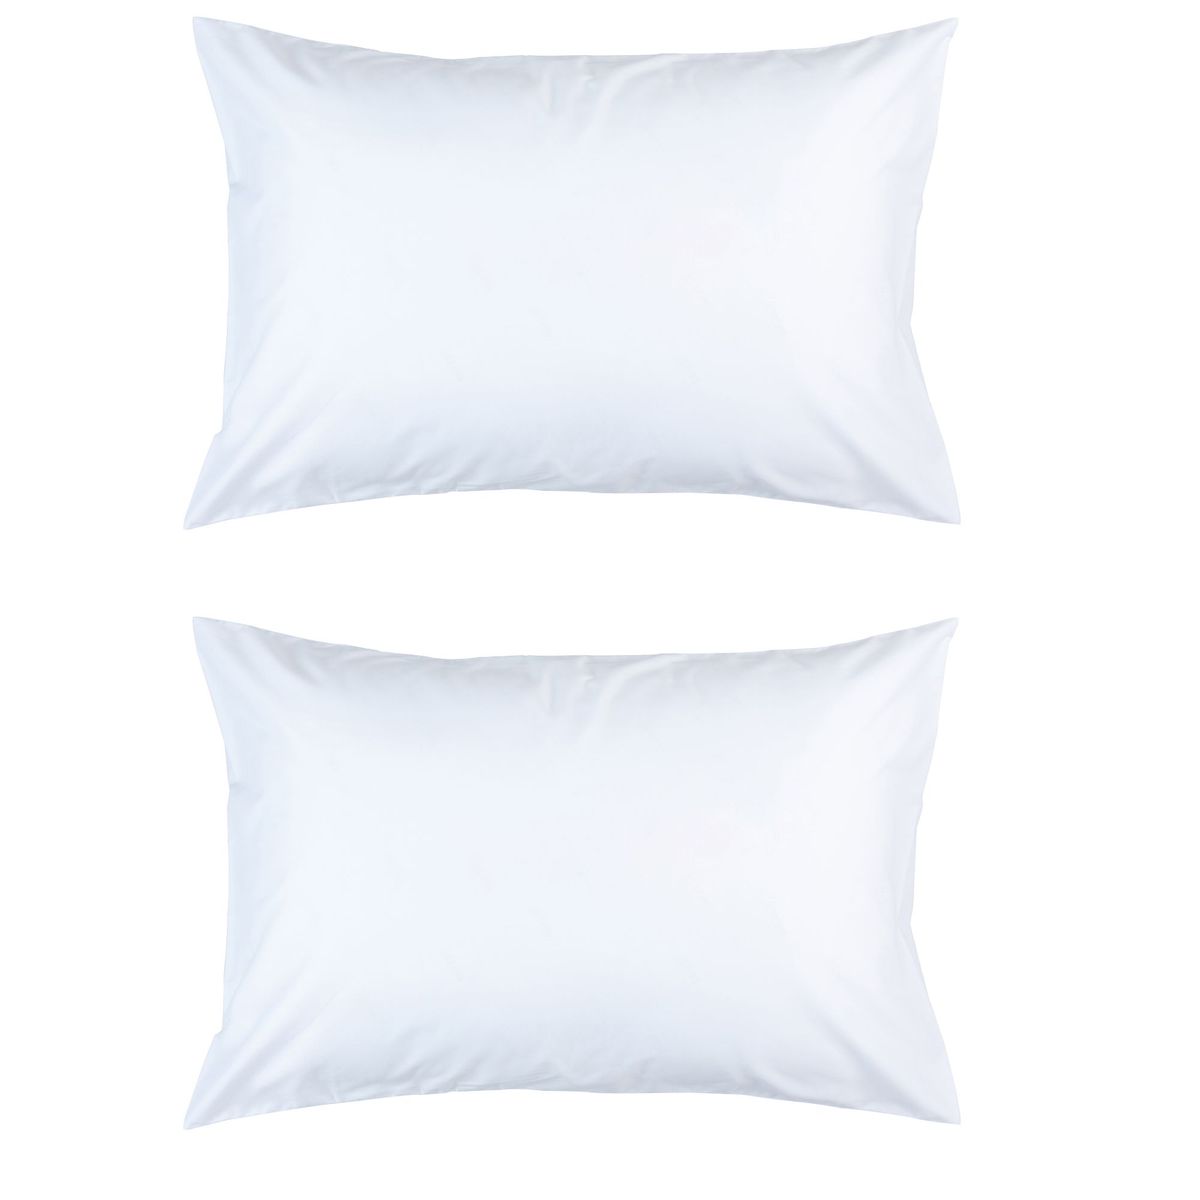 Lush Living - Pillows - Microfibre - Pack of 2